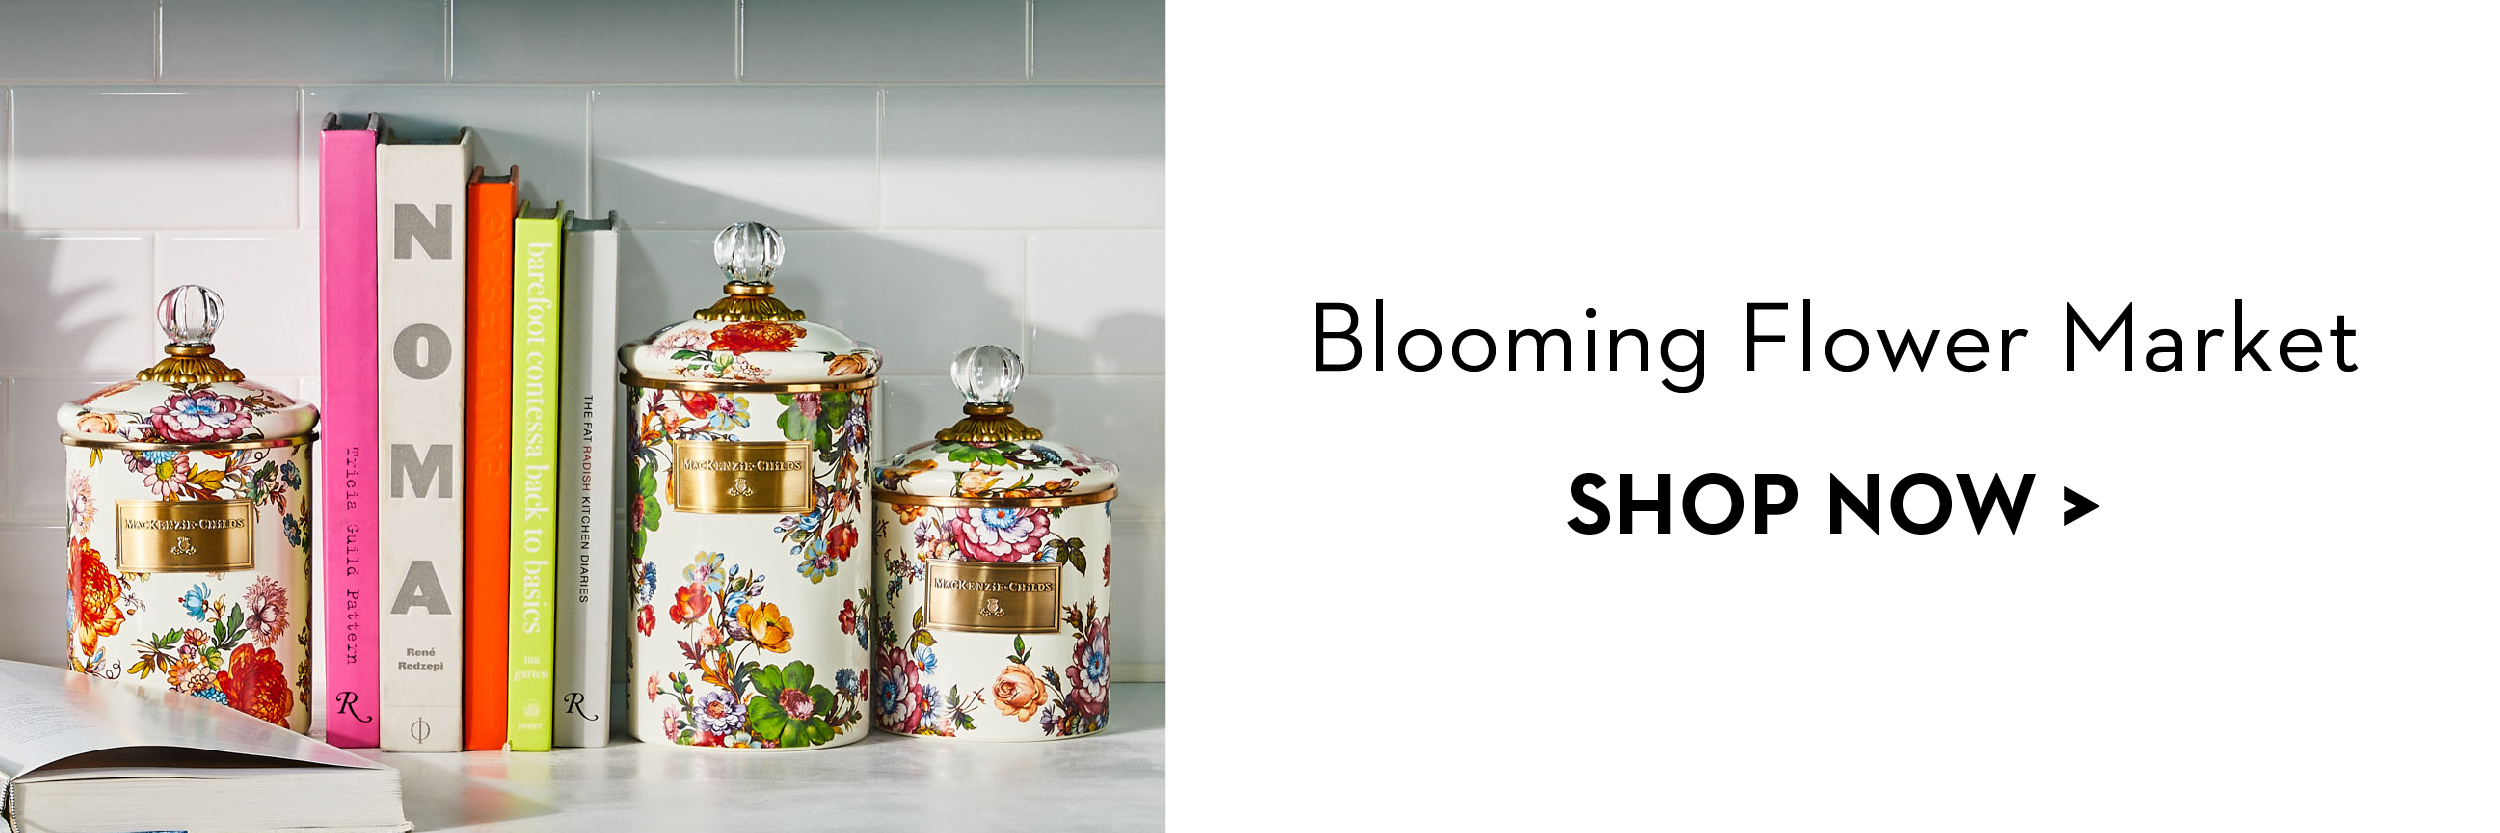 BLOOMING FLOWER MARKET | SHOP NOW